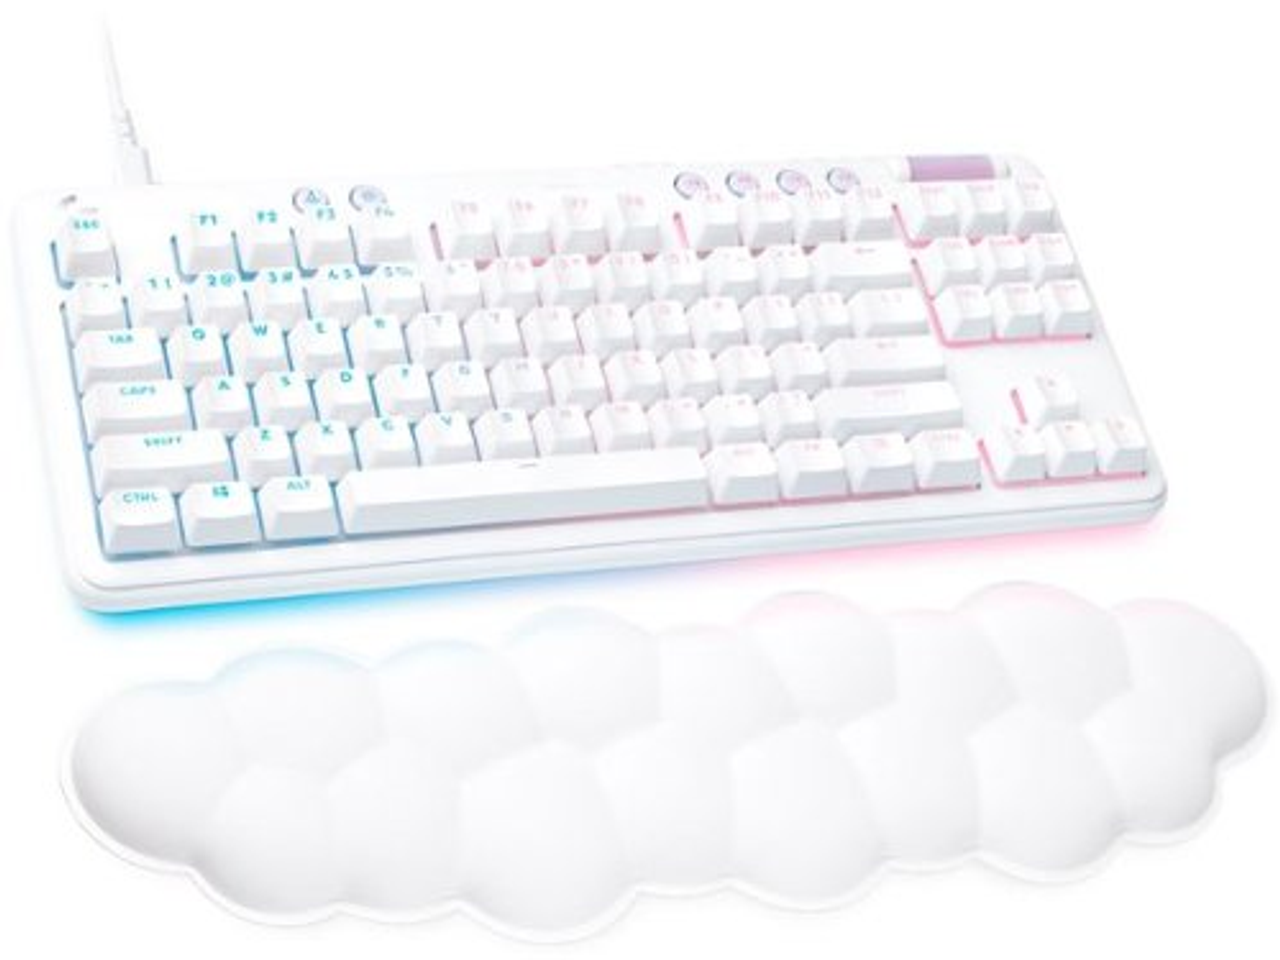 Logitech - G713 TKL Wired Mechanical Tactile Switch Gaming Keyboard for PC/Mac with Palm Rest Included - White Mist